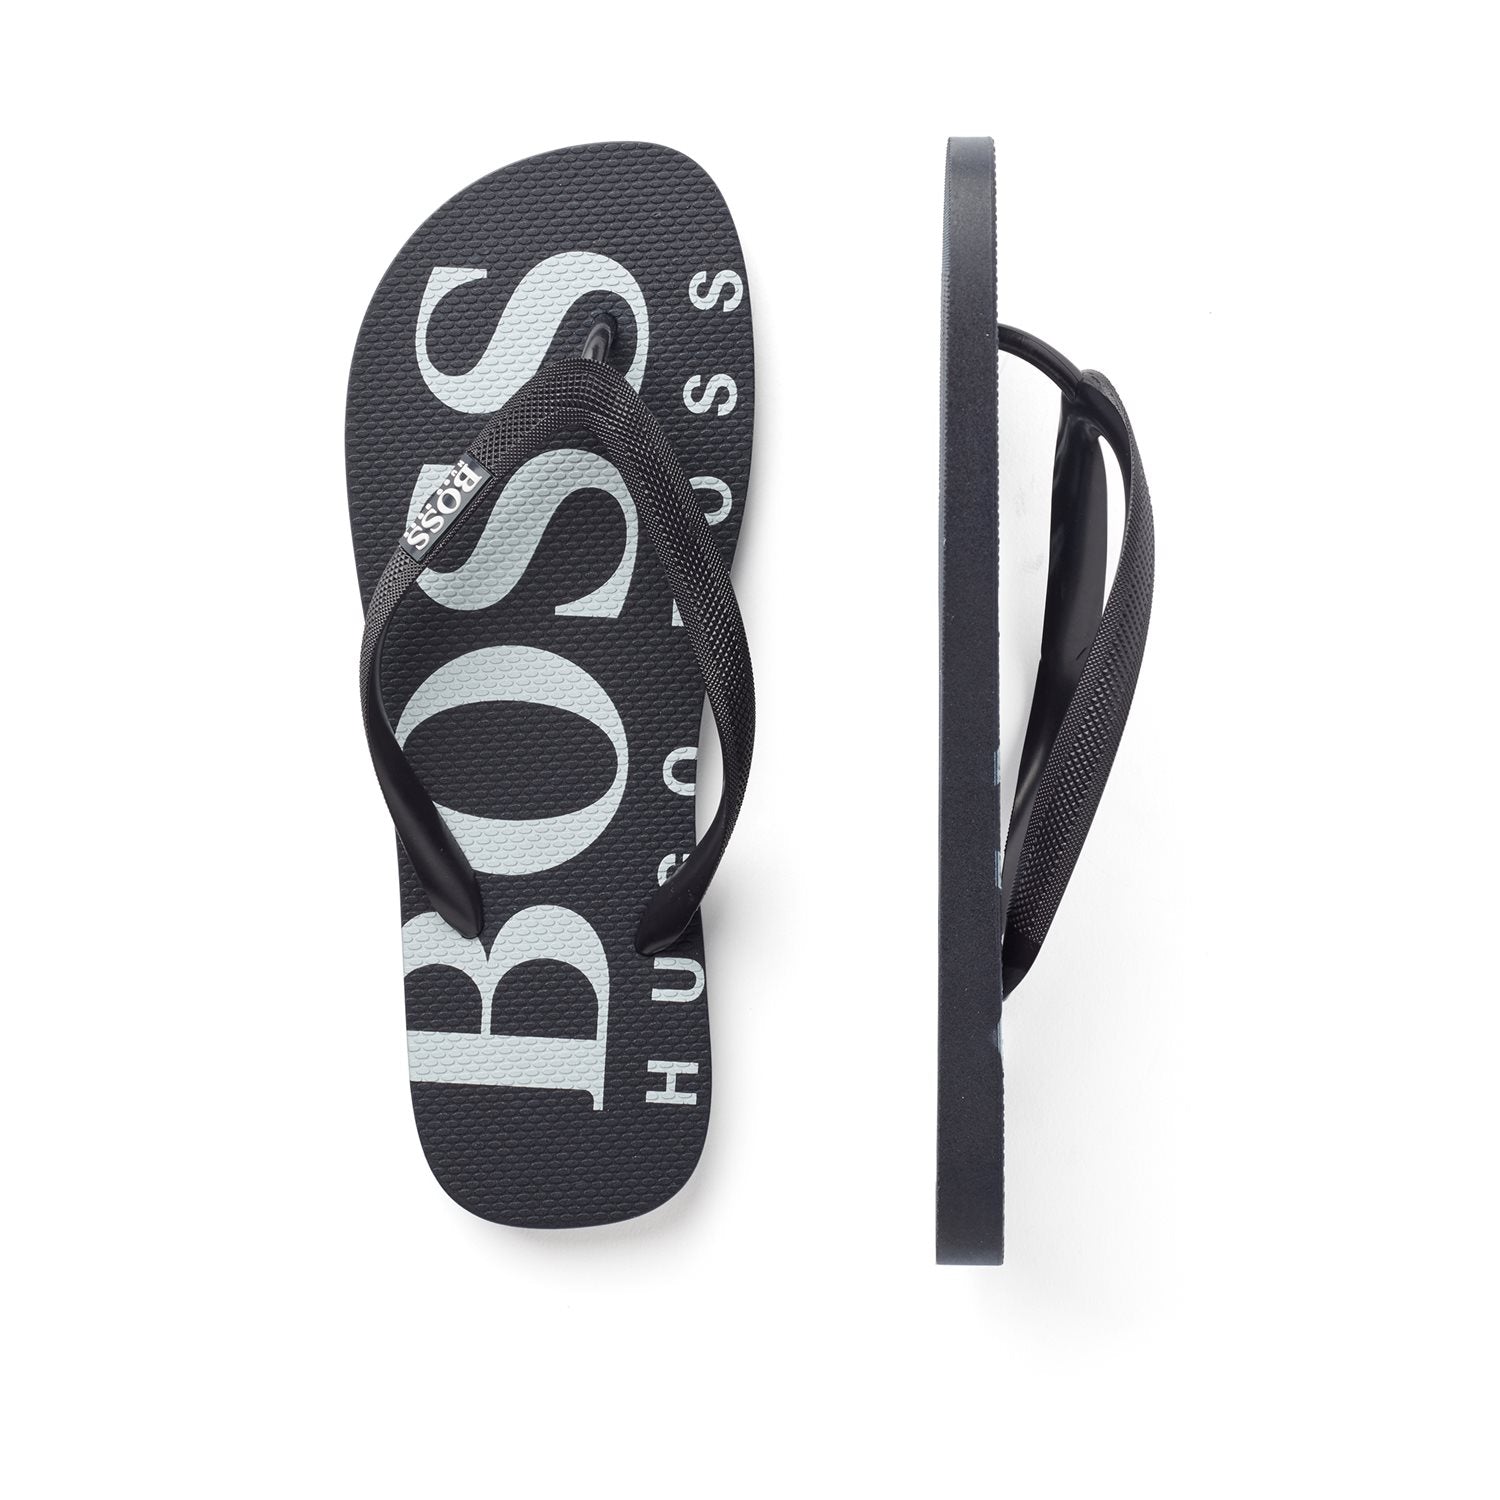 BOSS: Shoes men Hugo - Brown | BOSS sandals 50488911 online at GIGLIO.COM